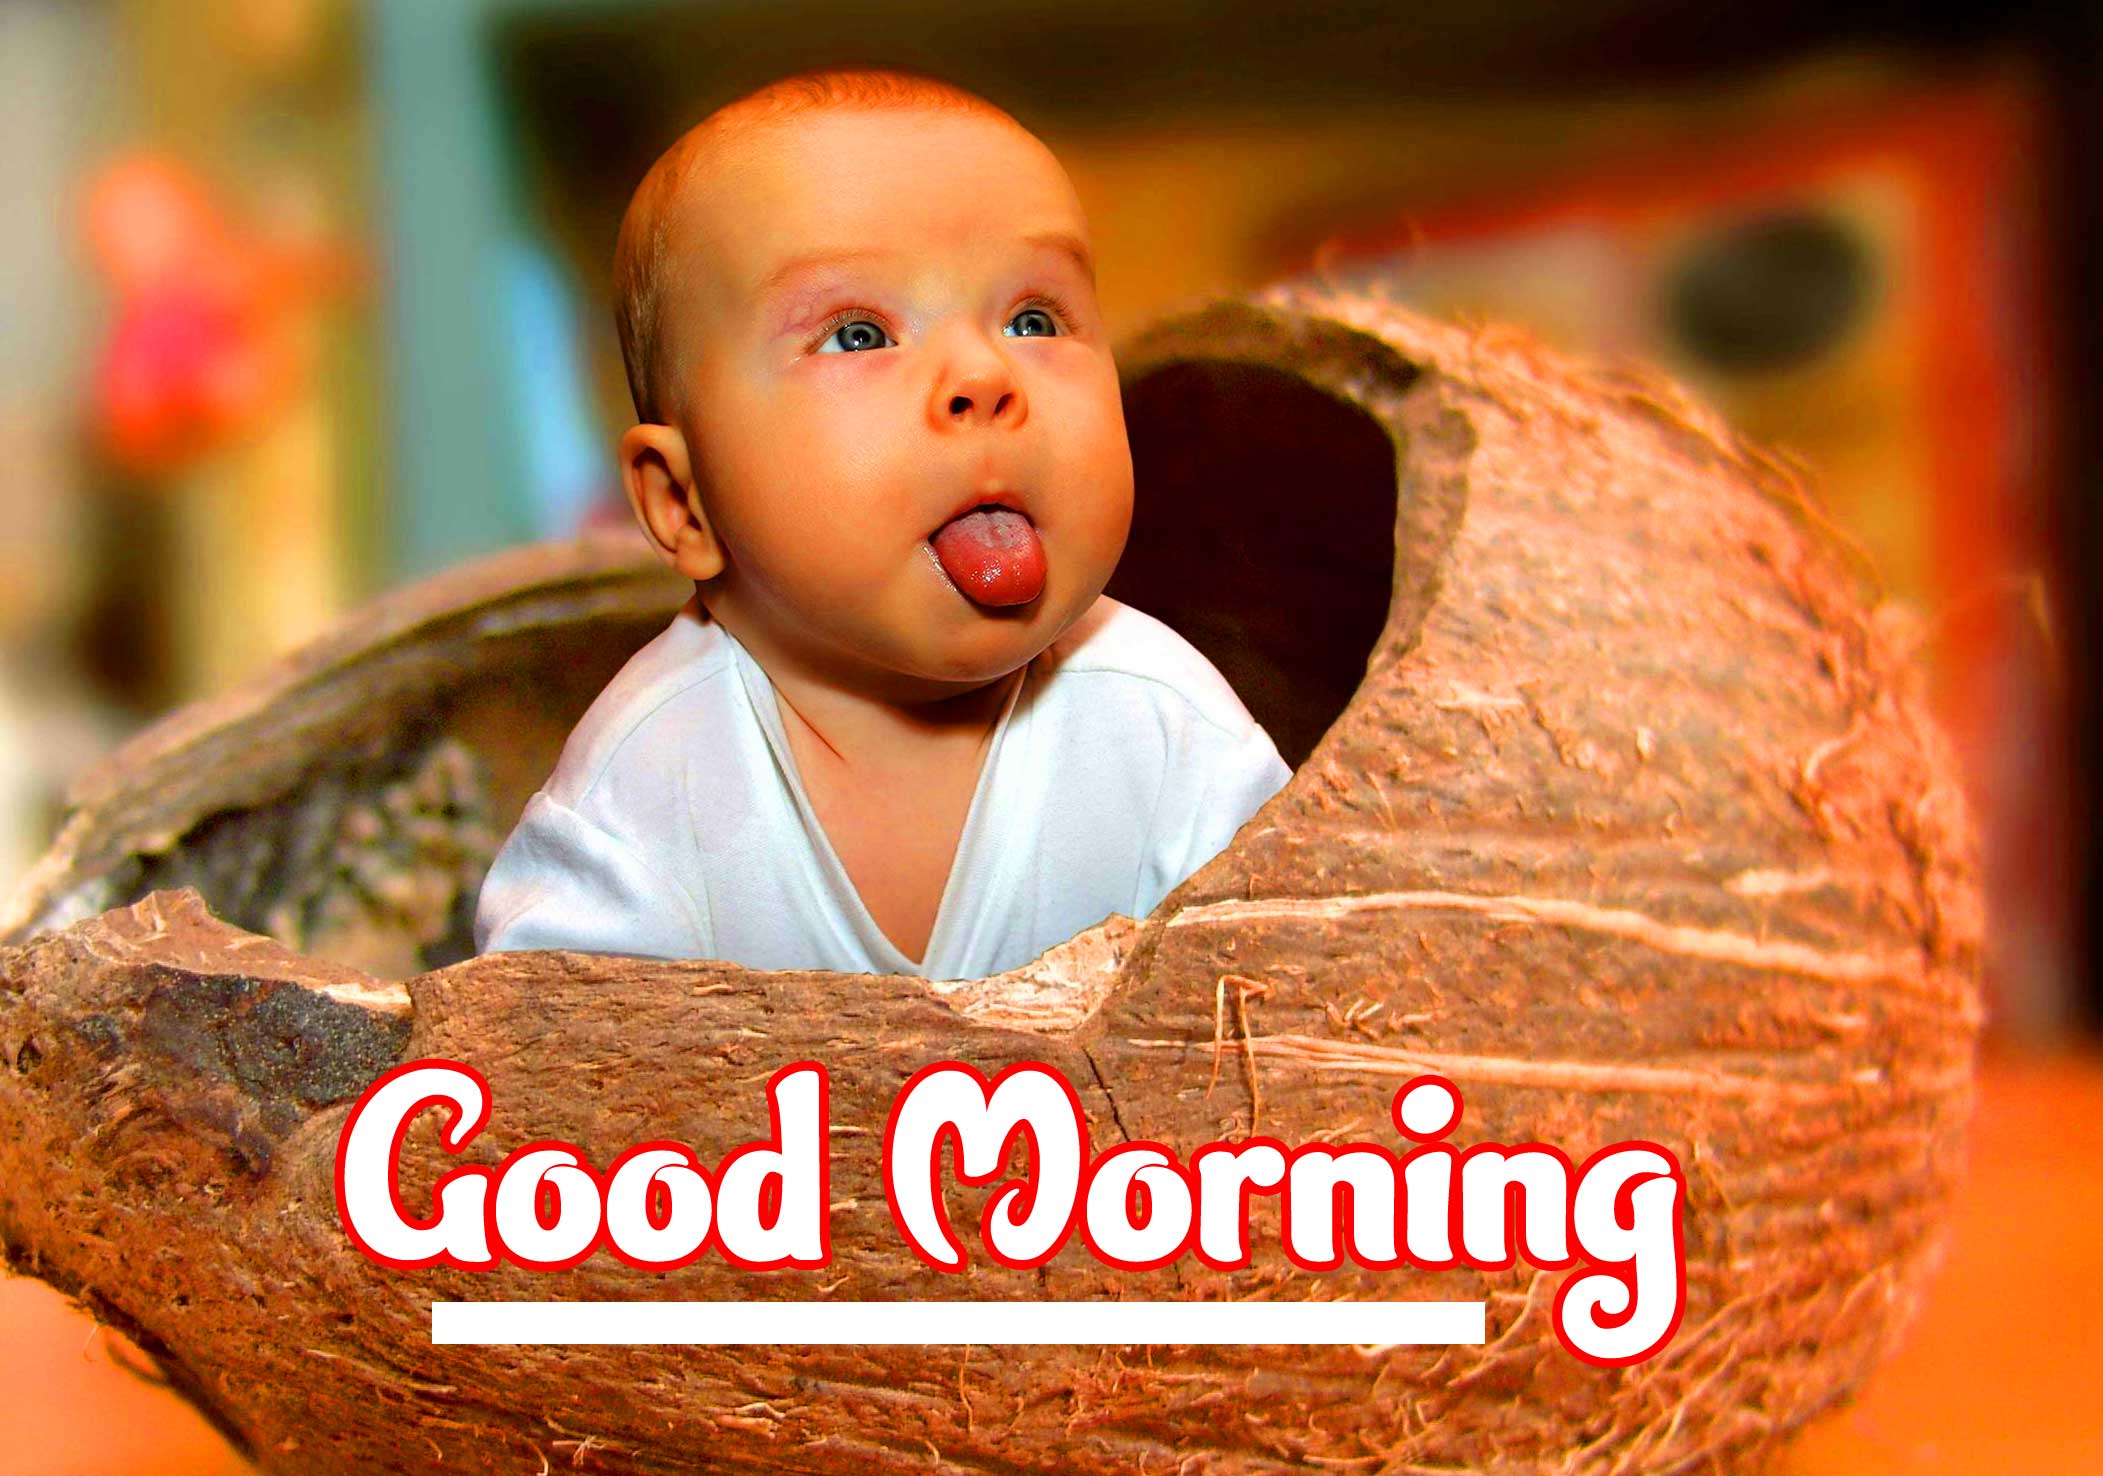 Cute Baby Boys & Girls Good Morning Images Pics Download 